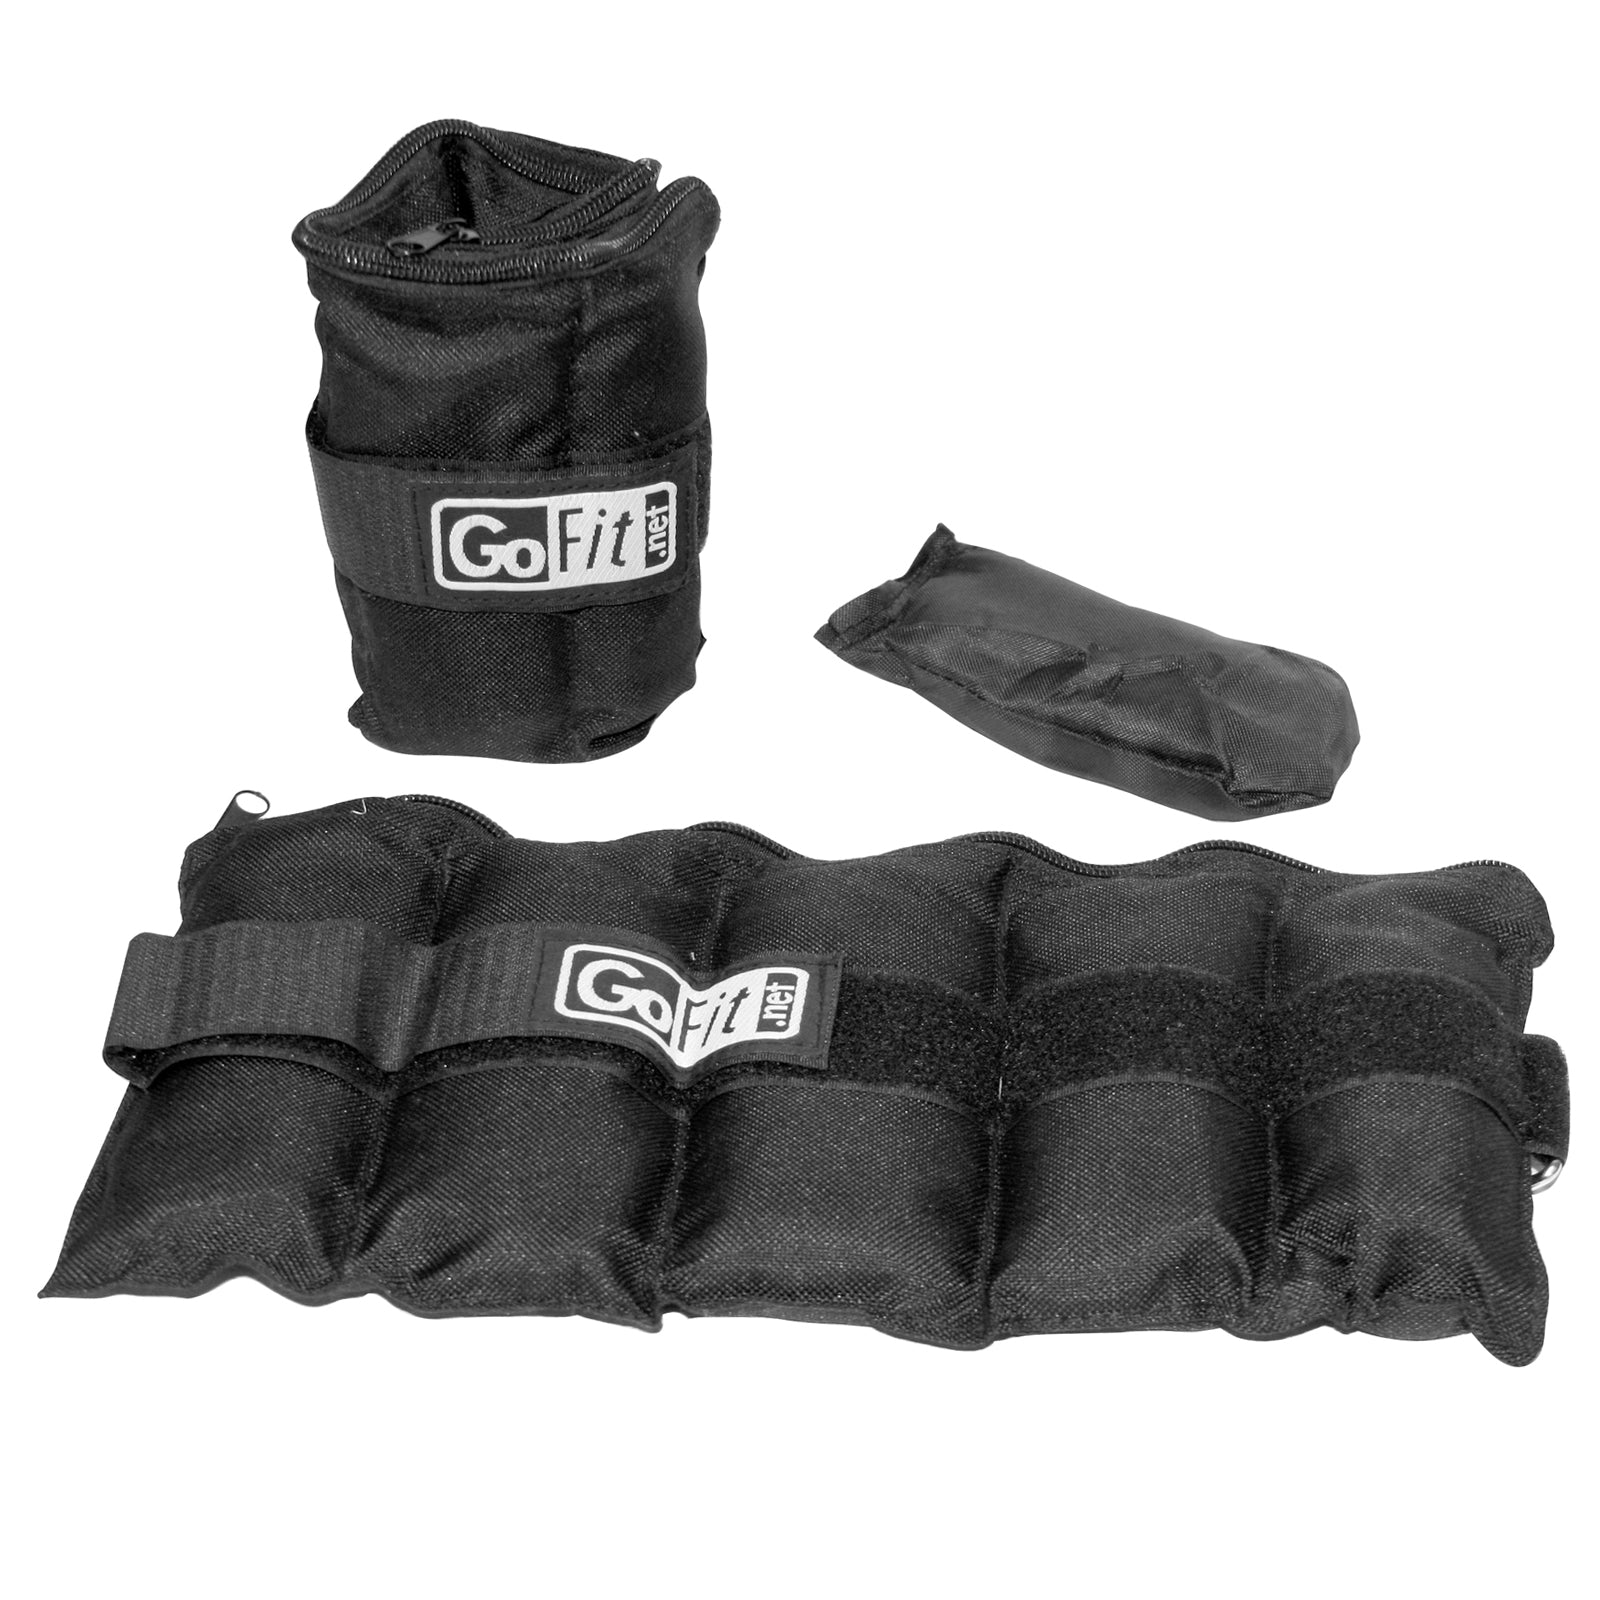 BalanceFrom GoFit Fully Adjustable Ankle Wrist Arm Leg Weights